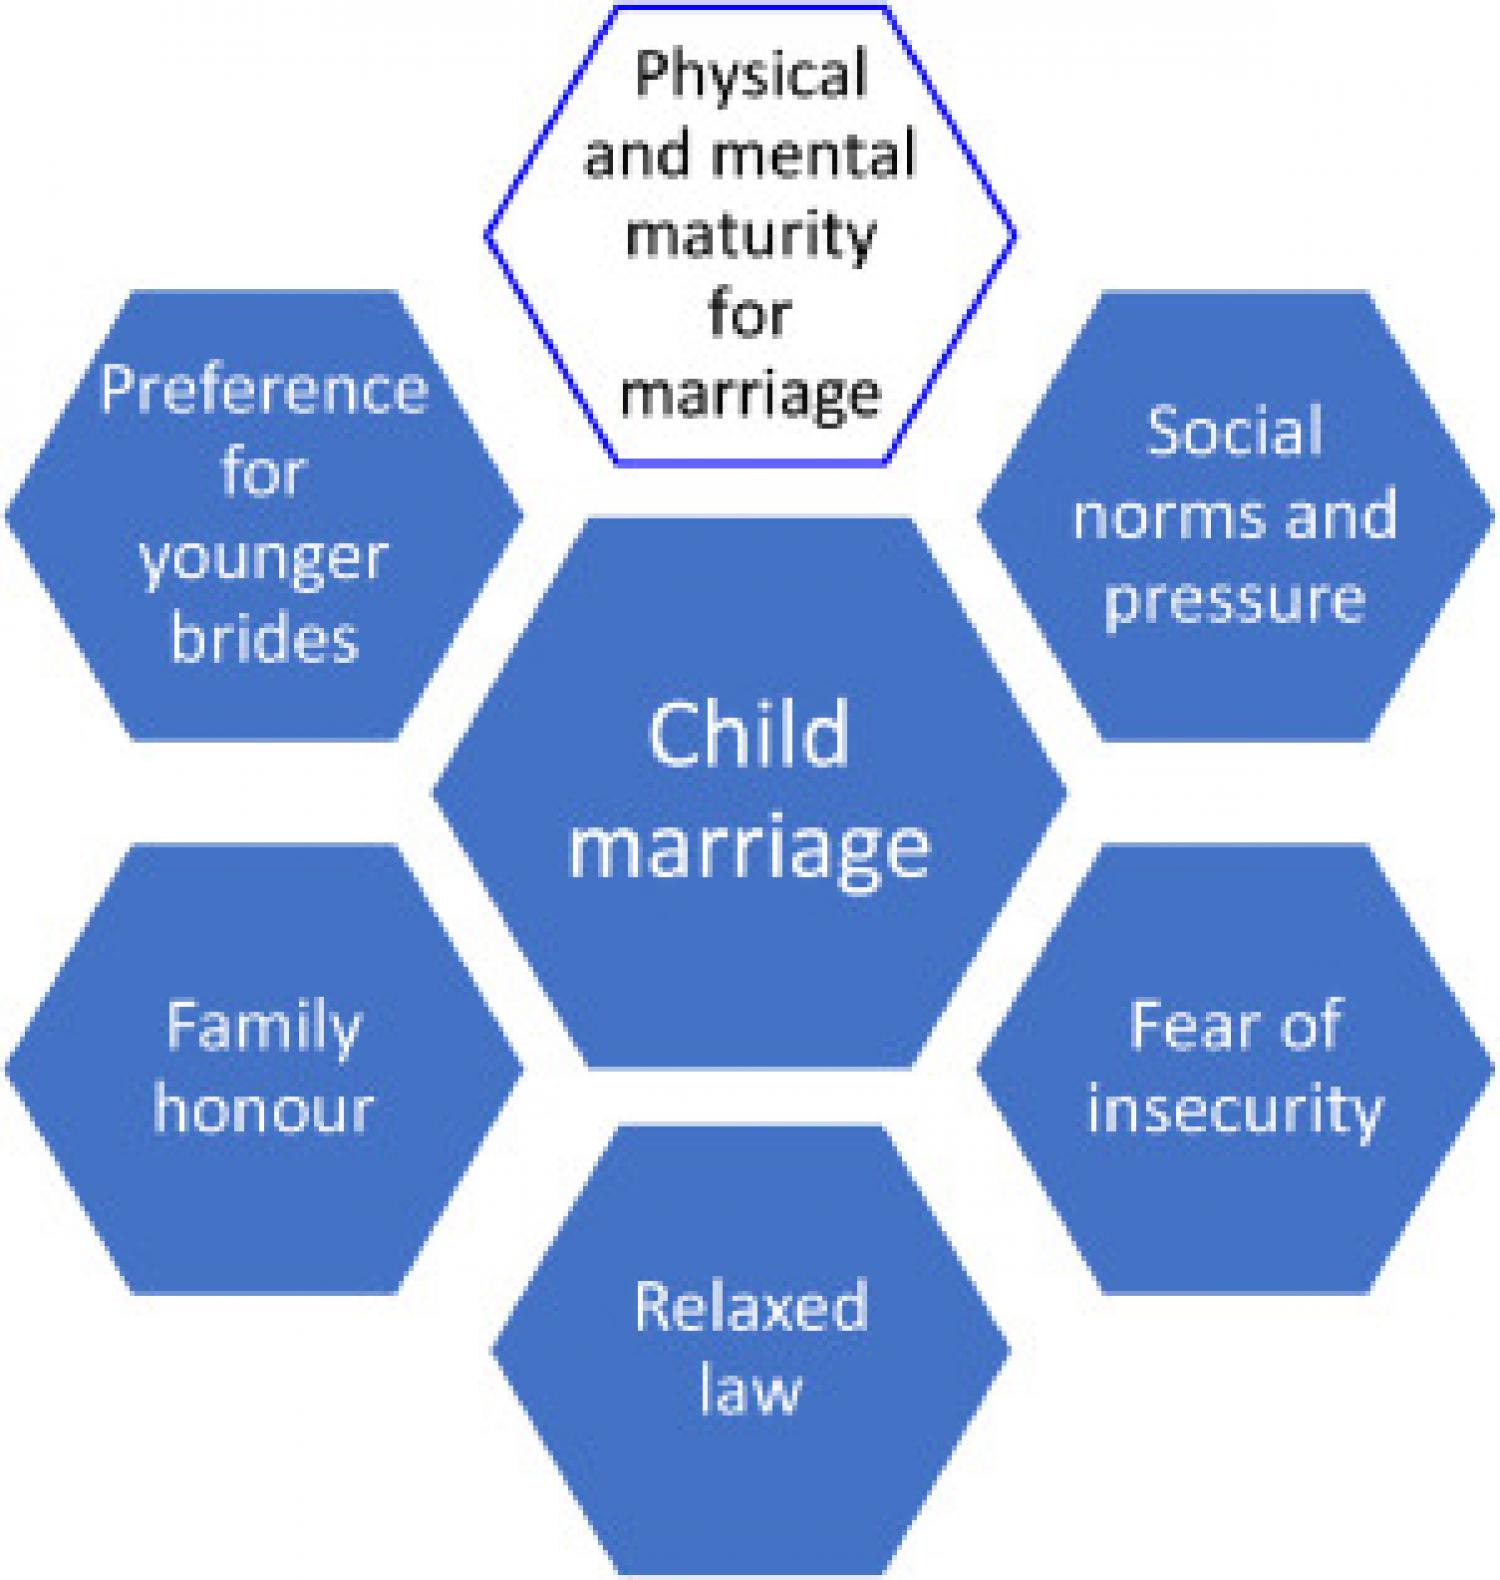 Factors influencing child marriage. All the factors except “physical and mental maturity for marriage” promote child marriage